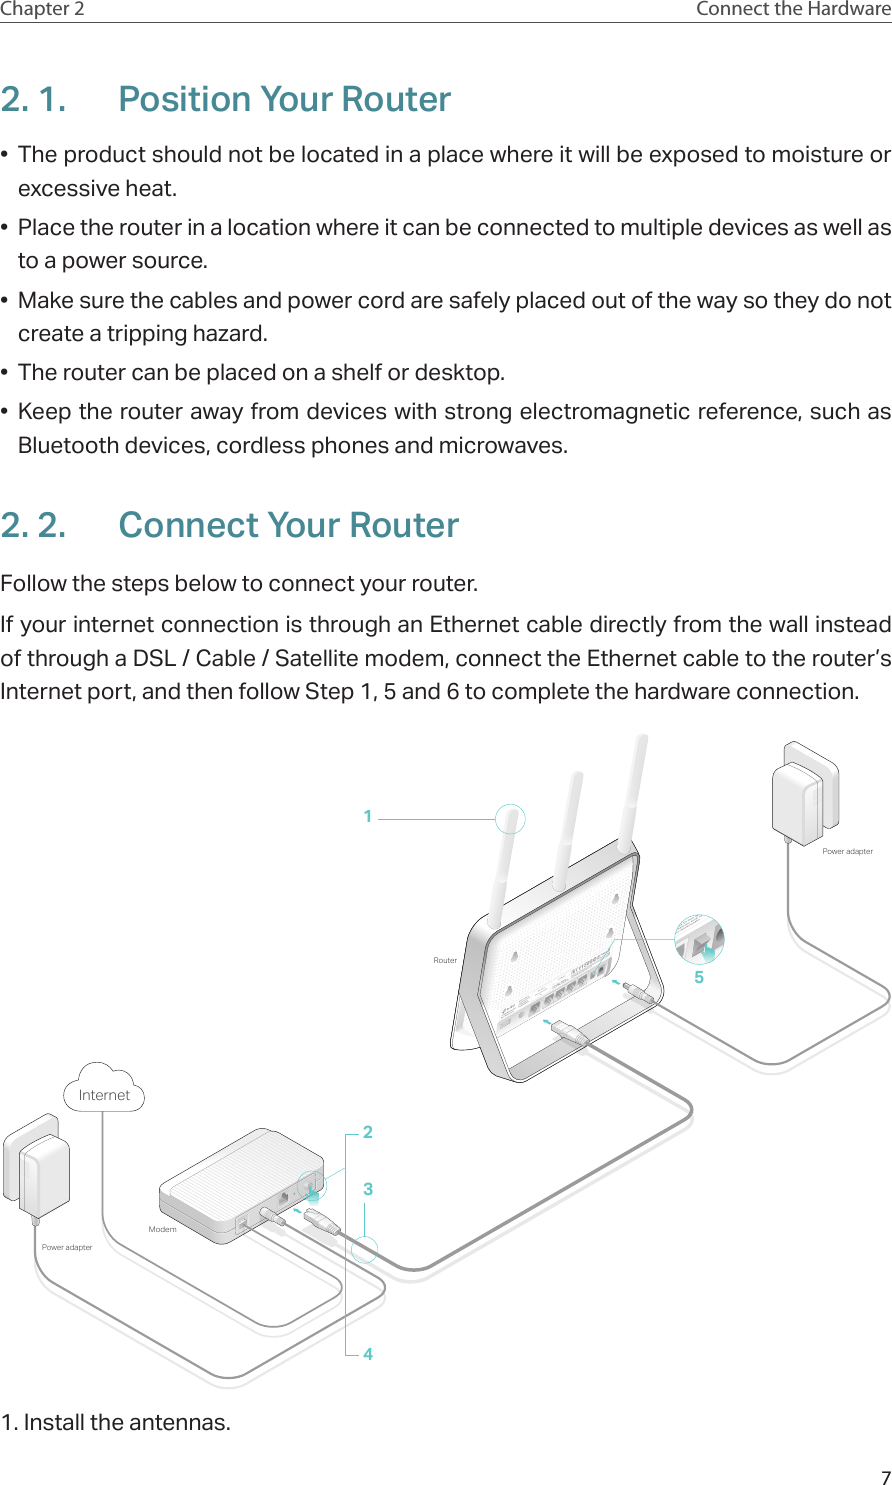 7Chapter 2 Connect the Hardware2. 1.  Position Your Router•  The product should not be located in a place where it will be exposed to moisture or excessive heat.•  Place the router in a location where it can be connected to multiple devices as well as to a power source.•  Make sure the cables and power cord are safely placed out of the way so they do not create a tripping hazard.•  The router can be placed on a shelf or desktop.•  Keep the router away from devices with strong electromagnetic reference, such as Bluetooth devices, cordless phones and microwaves.2. 2.  Connect Your RouterFollow the steps below to connect your router.If your internet connection is through an Ethernet cable directly from the wall instead of through a DSL / Cable / Satellite modem, connect the Ethernet cable to the router’s Internet port, and then follow Step 1, 5 and 6 to complete the hardware connection.ModemPower adapterRouterPower adapter5Internet24311. Install the antennas.